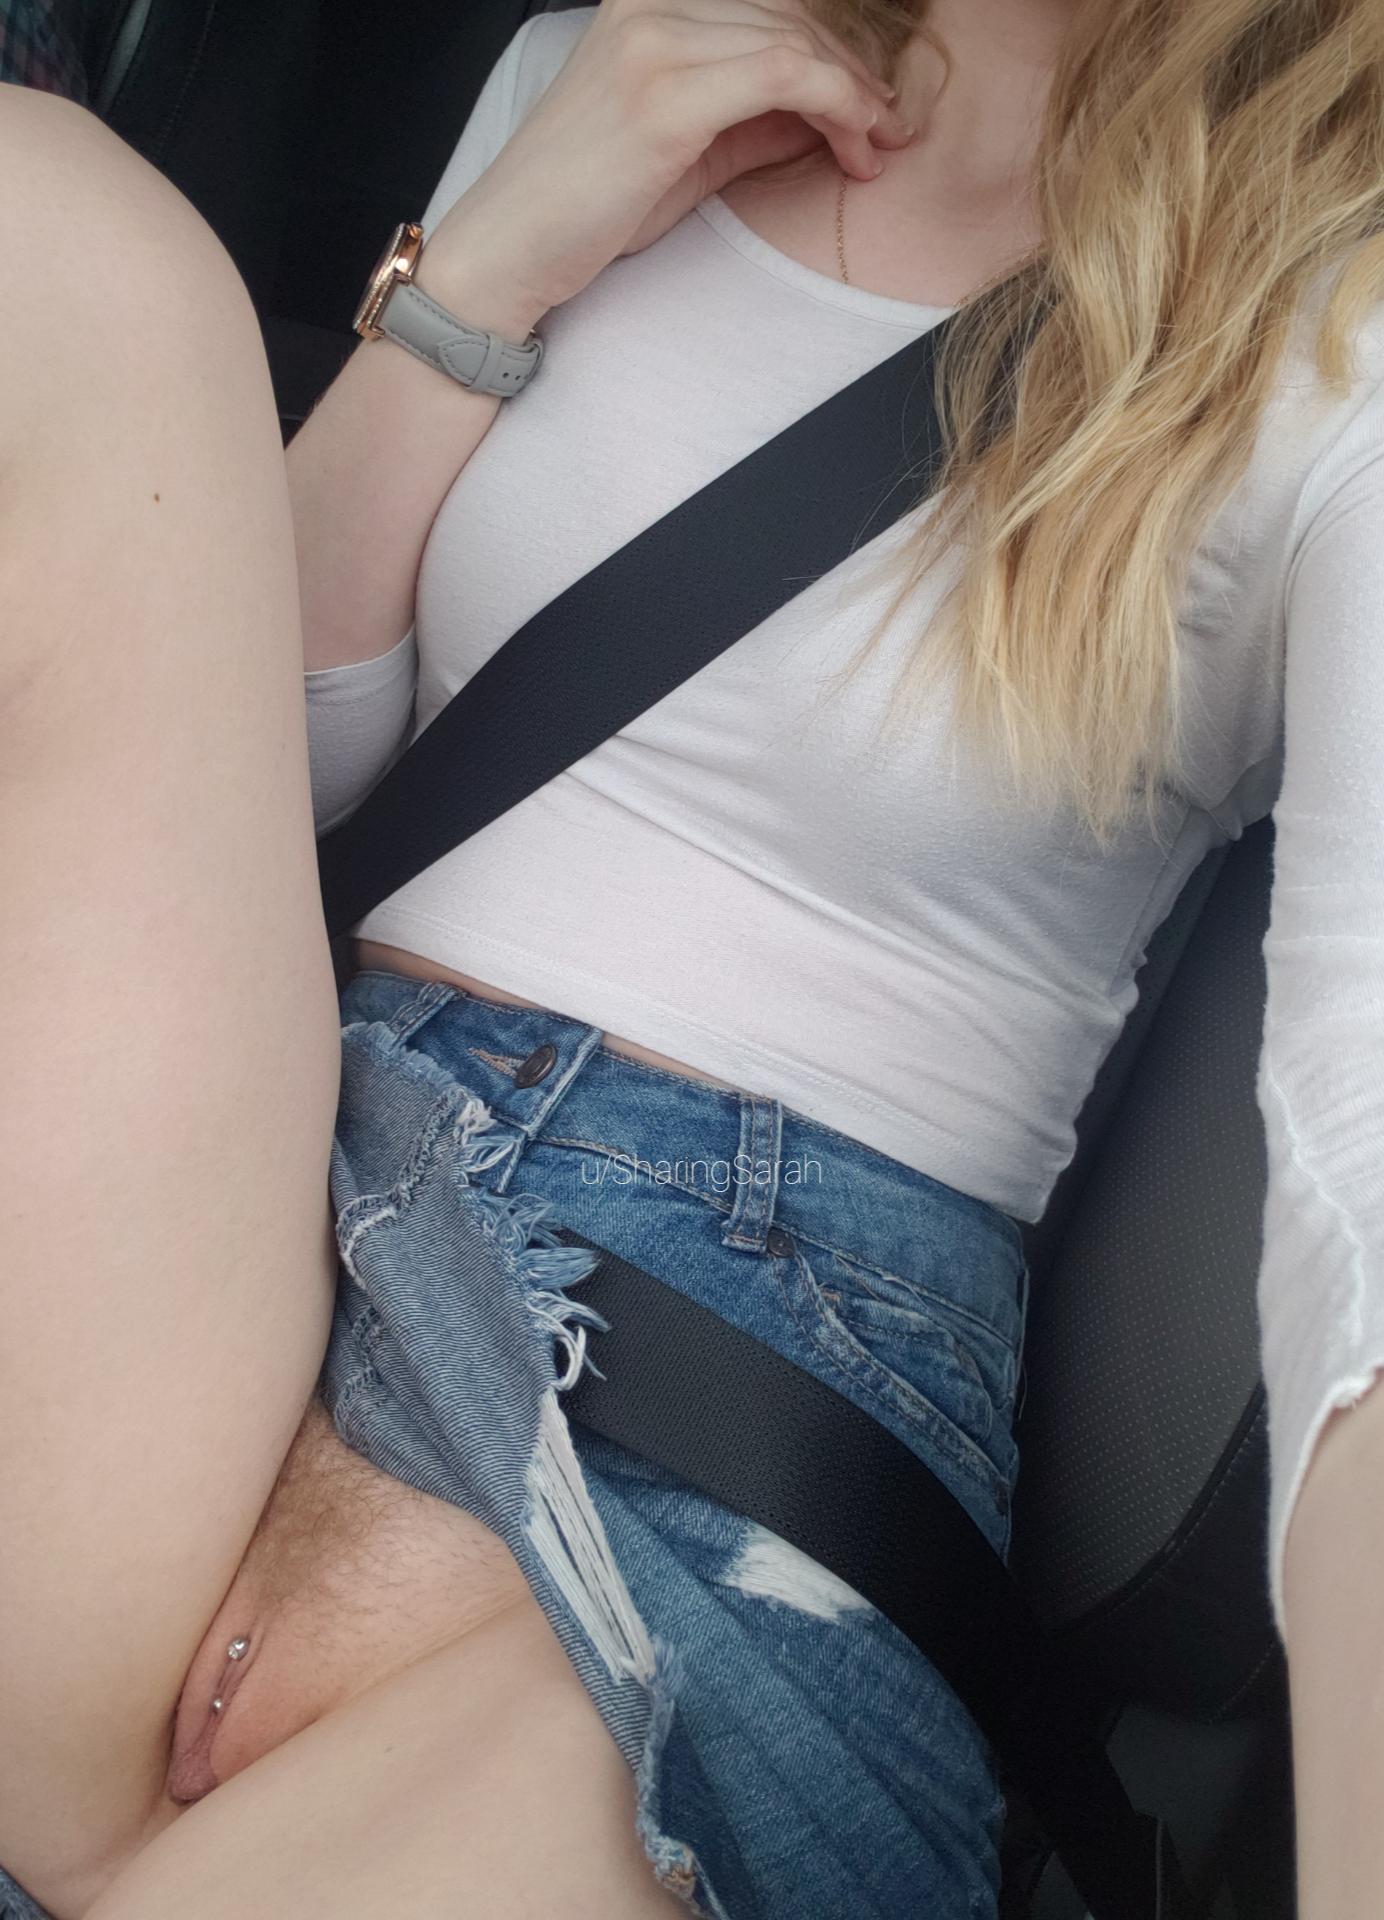 Took a trip to the grocery store, wanted to share my outfit with you ðŸ˜‰